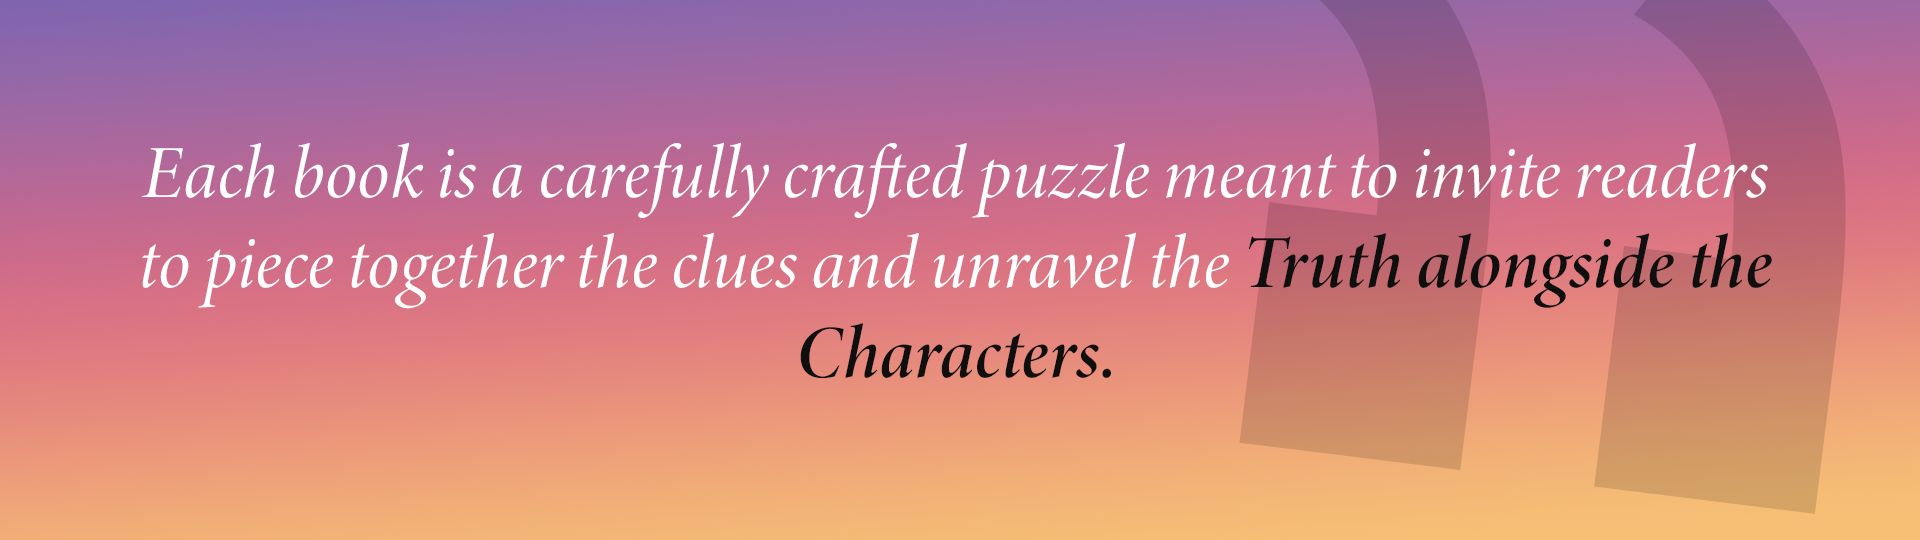 Each book is a carefully crafted puzzle meant to invite readers to piece together the clues and unravel the Truth alongside the Characters.